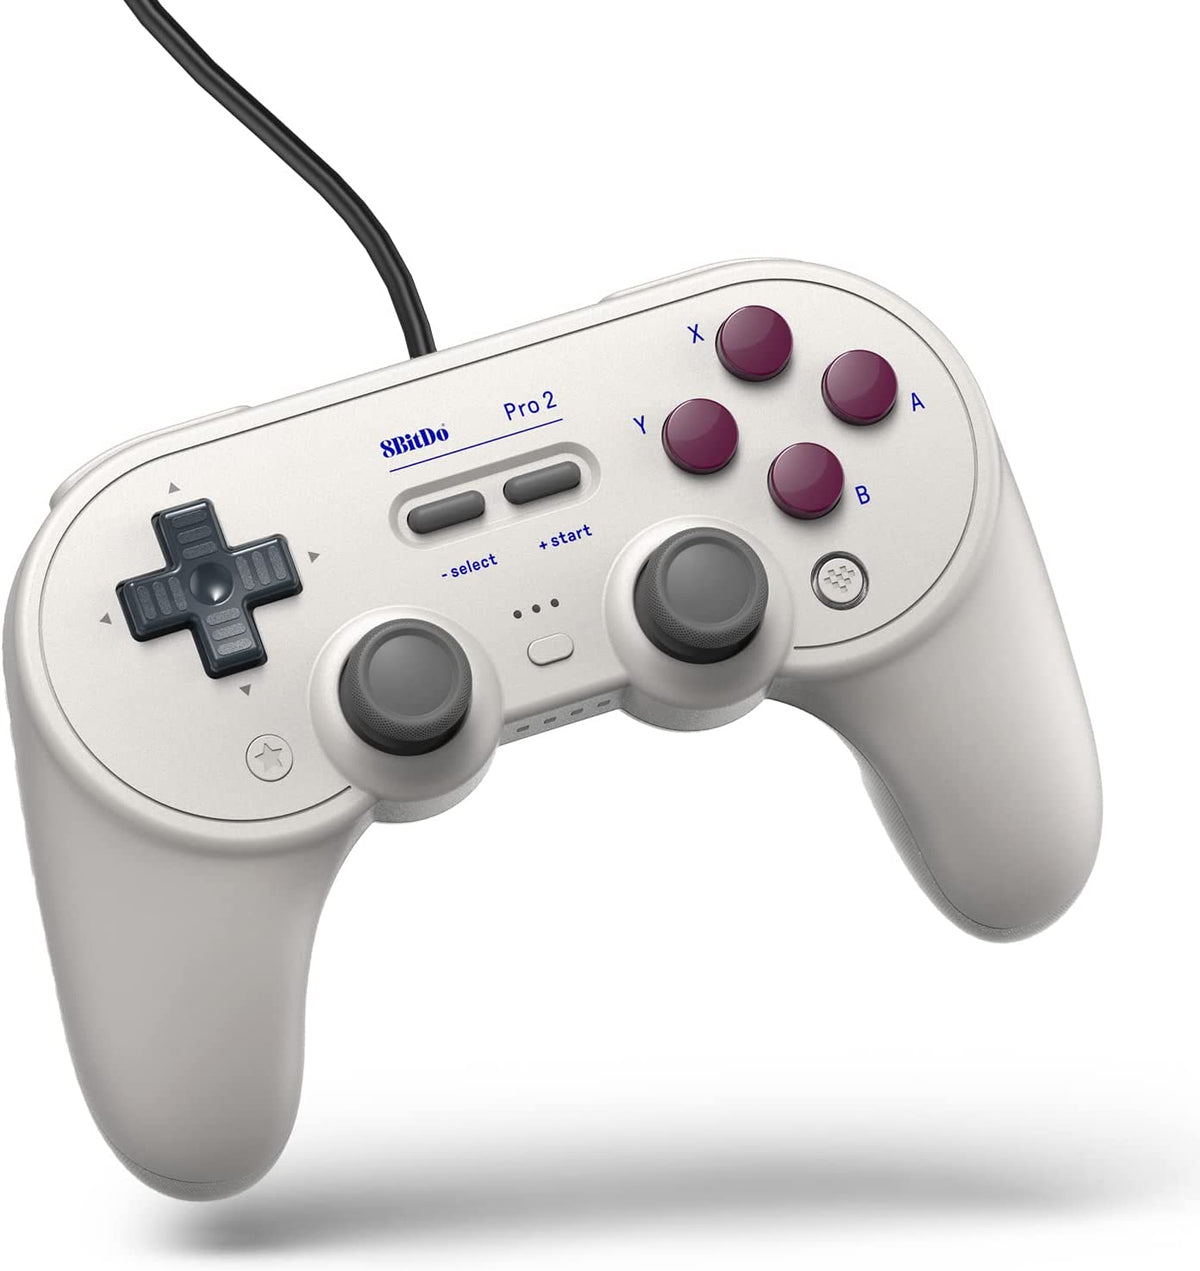 8BitDo Pro2 Wired USB controller G Classic edition Gamesellers.nl